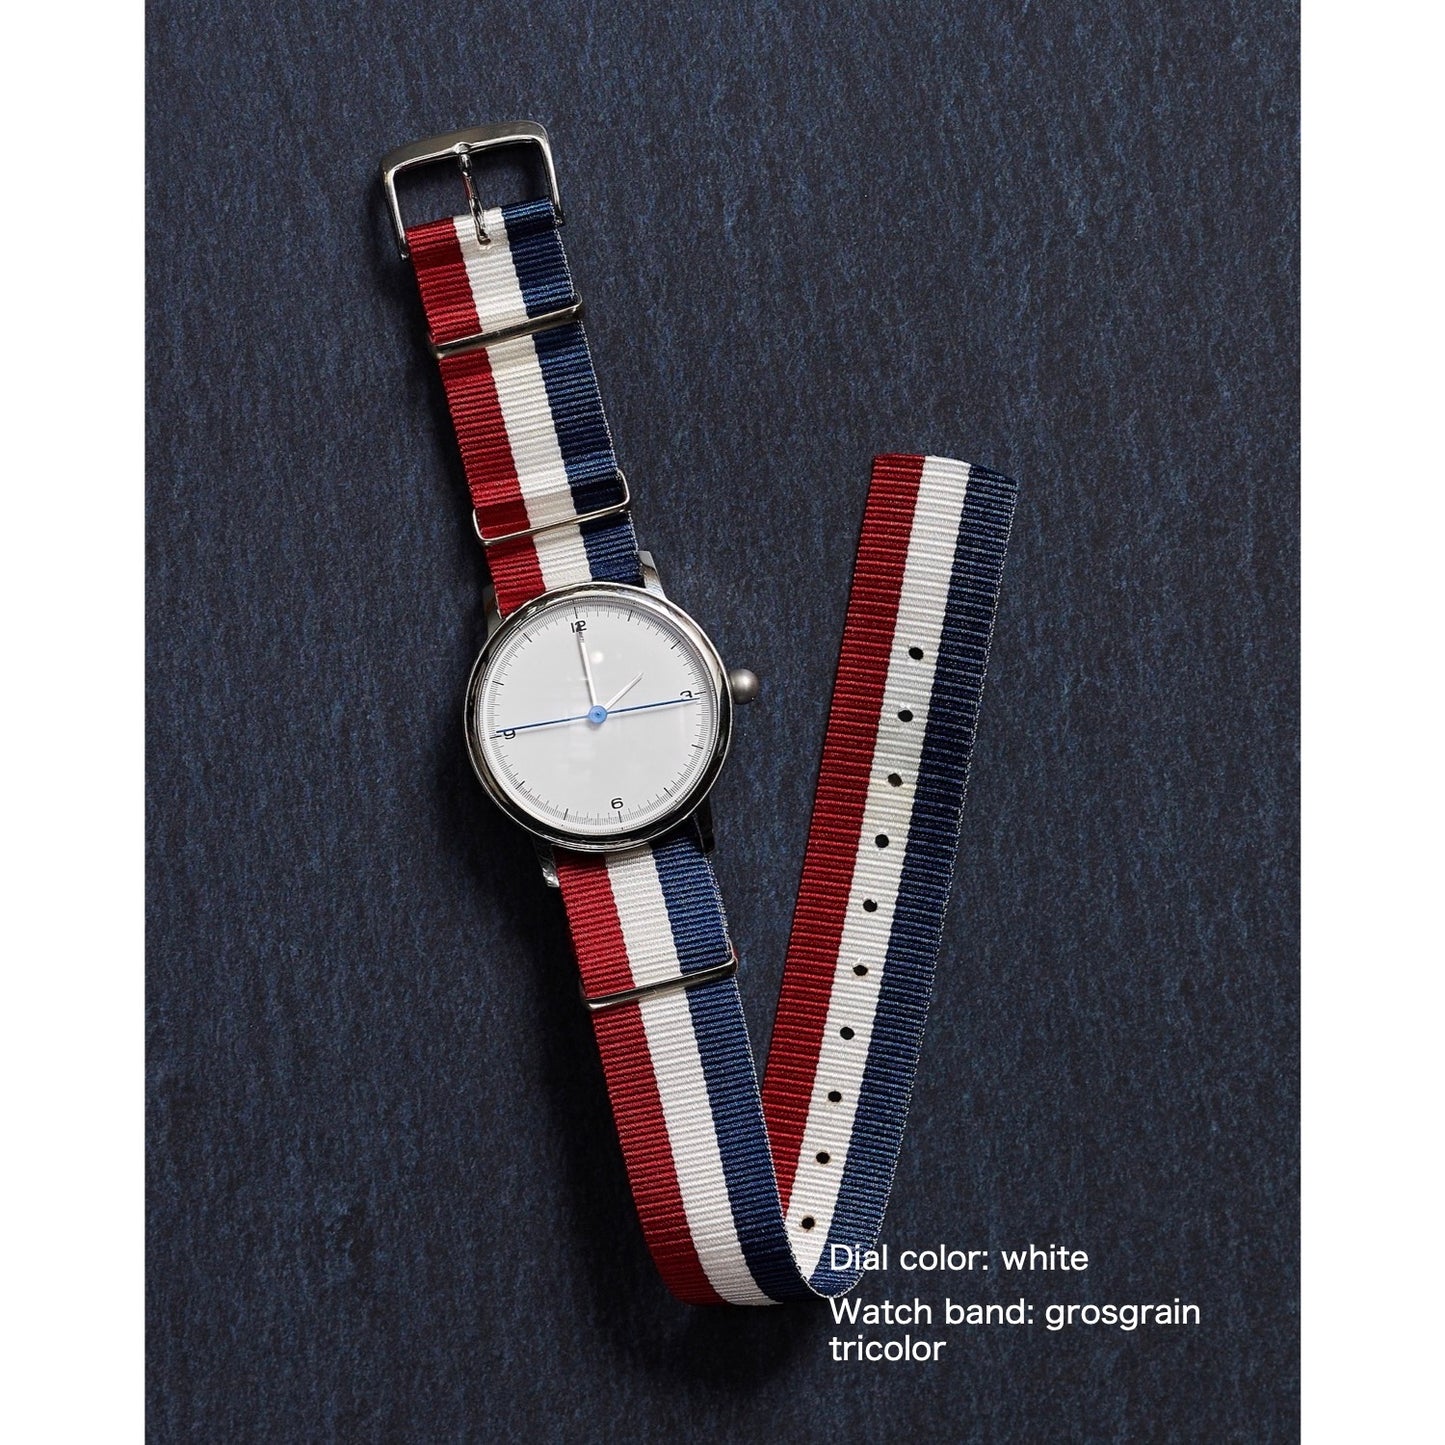 Dial color: white / watch band: grosgrain tricolor